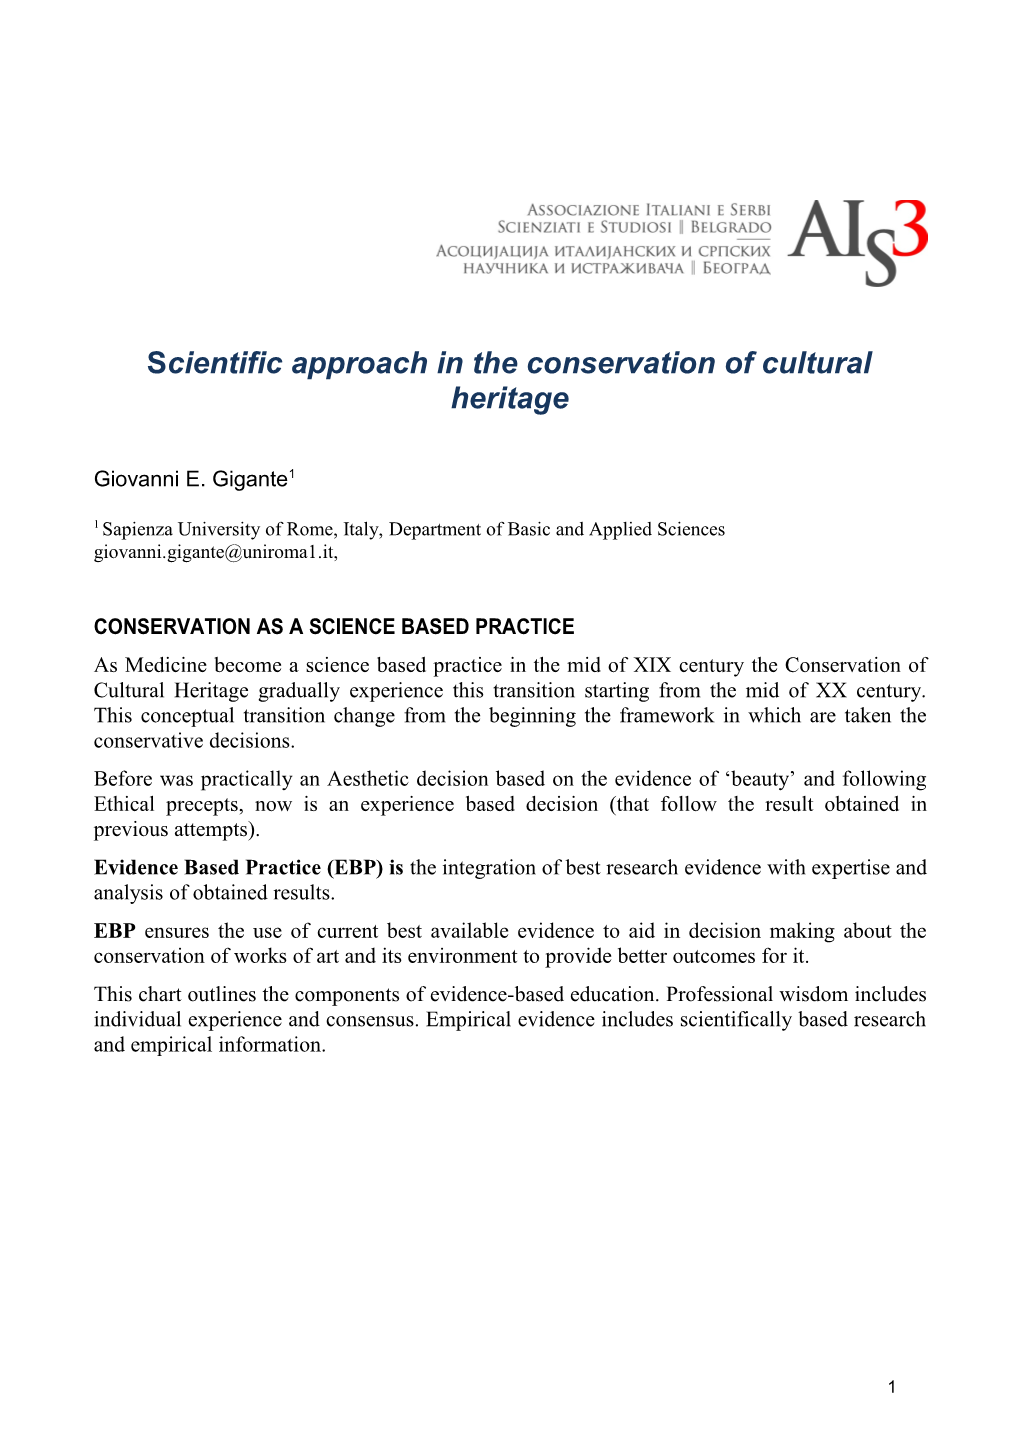 AIS3: Italian - Serbian Bilateral Workshop on Science for Cultural Heritage